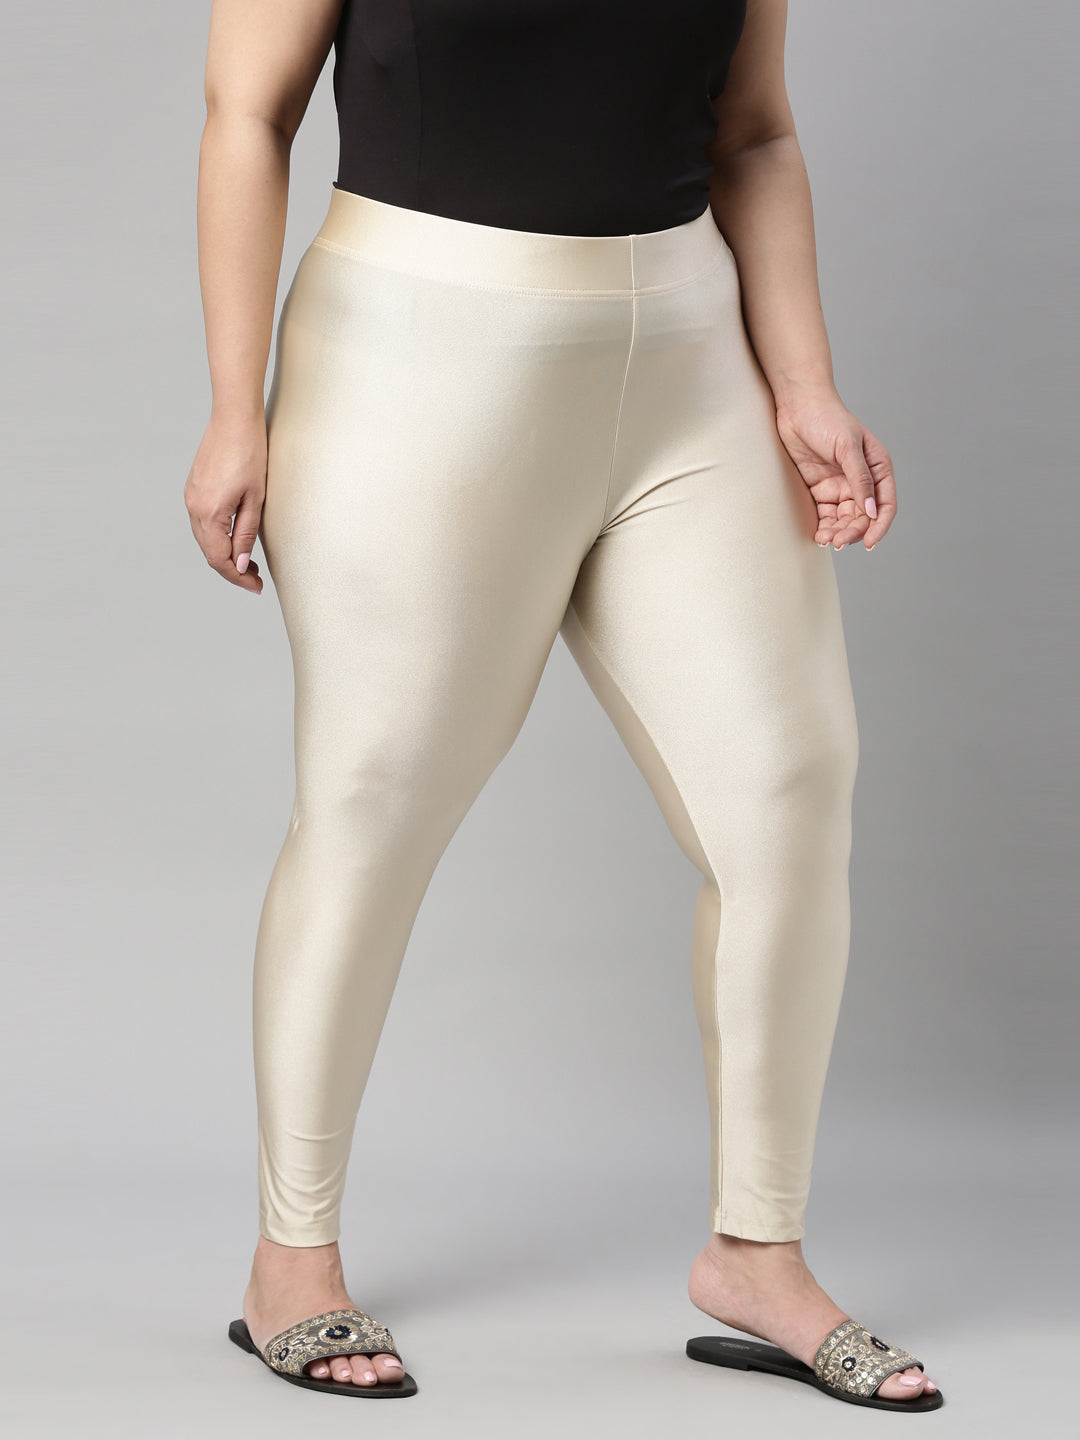 LEGGING SHIMMER STRETCHABLE GOLD 6 SIZE 3XL @AD